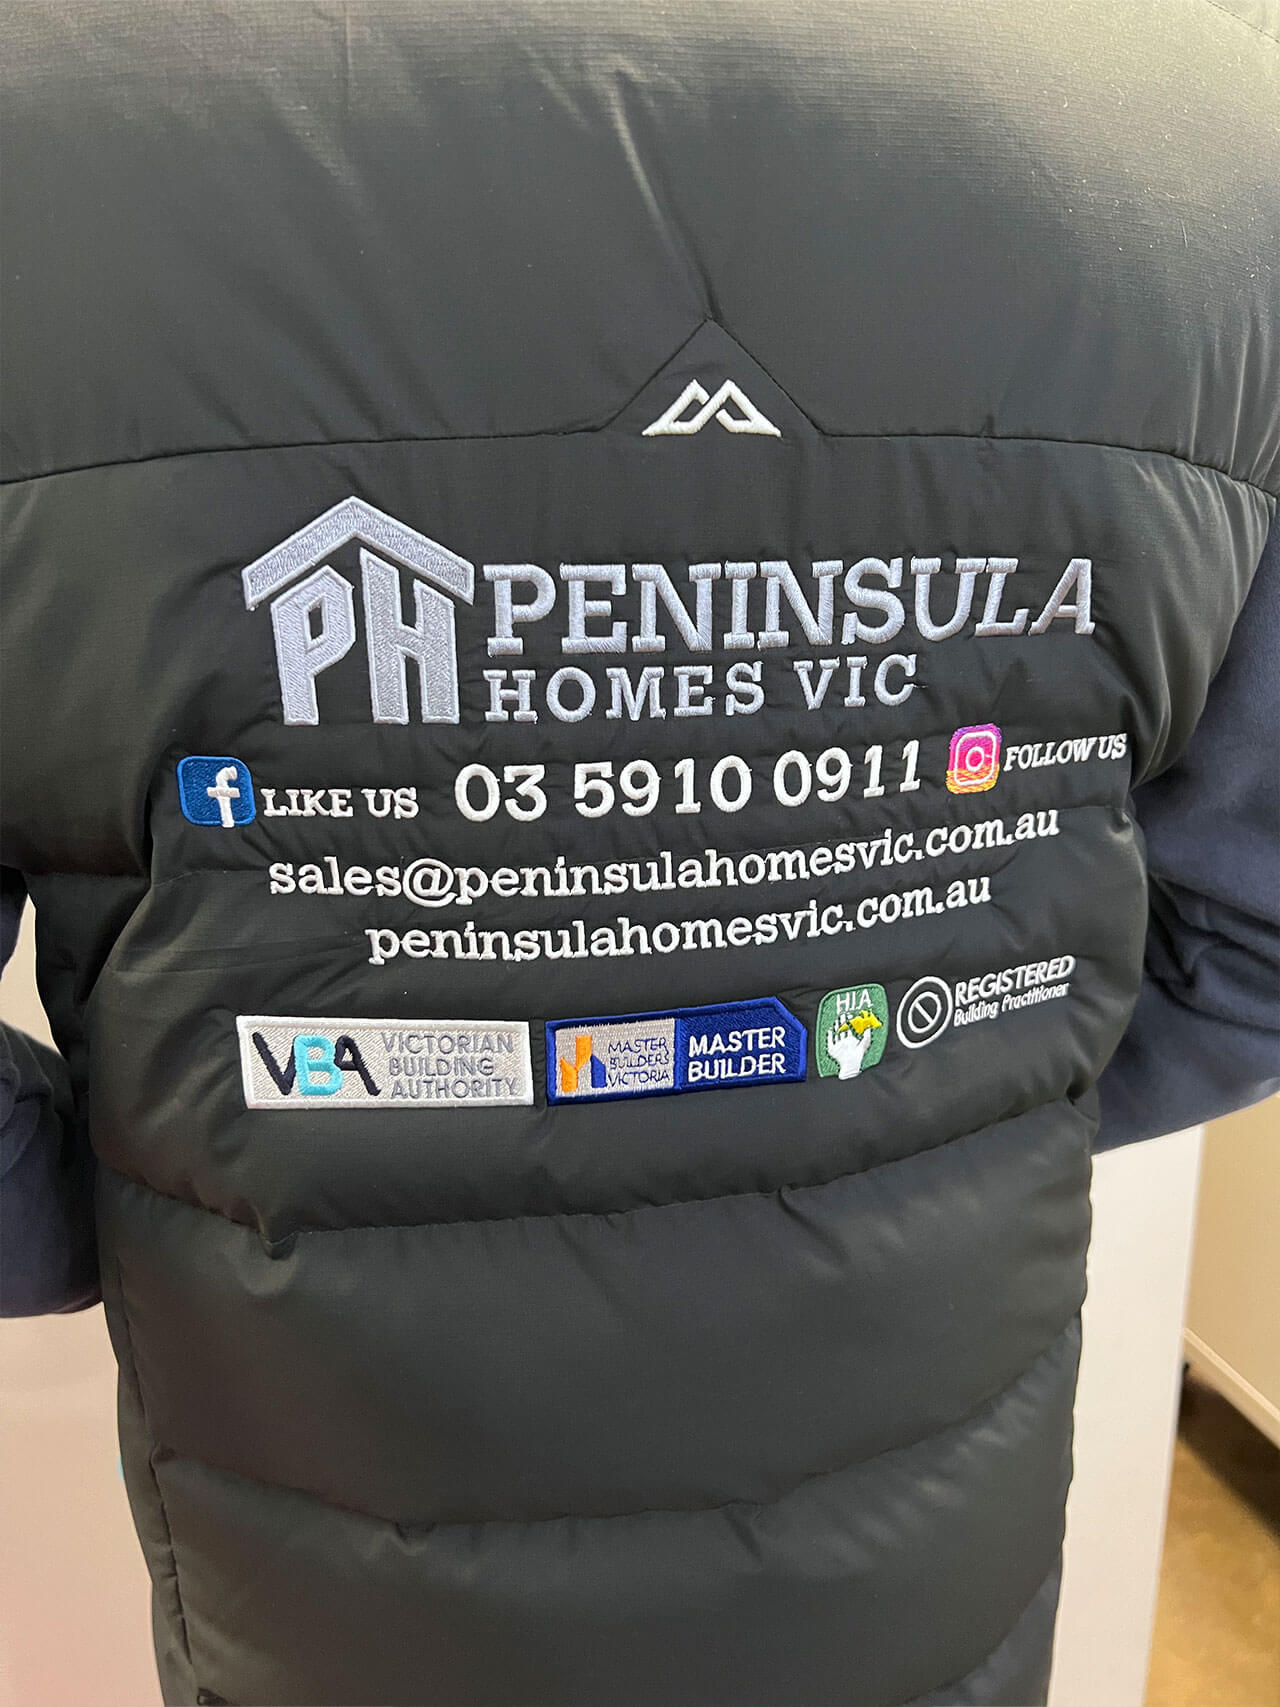 Peninsula Homes Vic embroidered logo and text on jacket